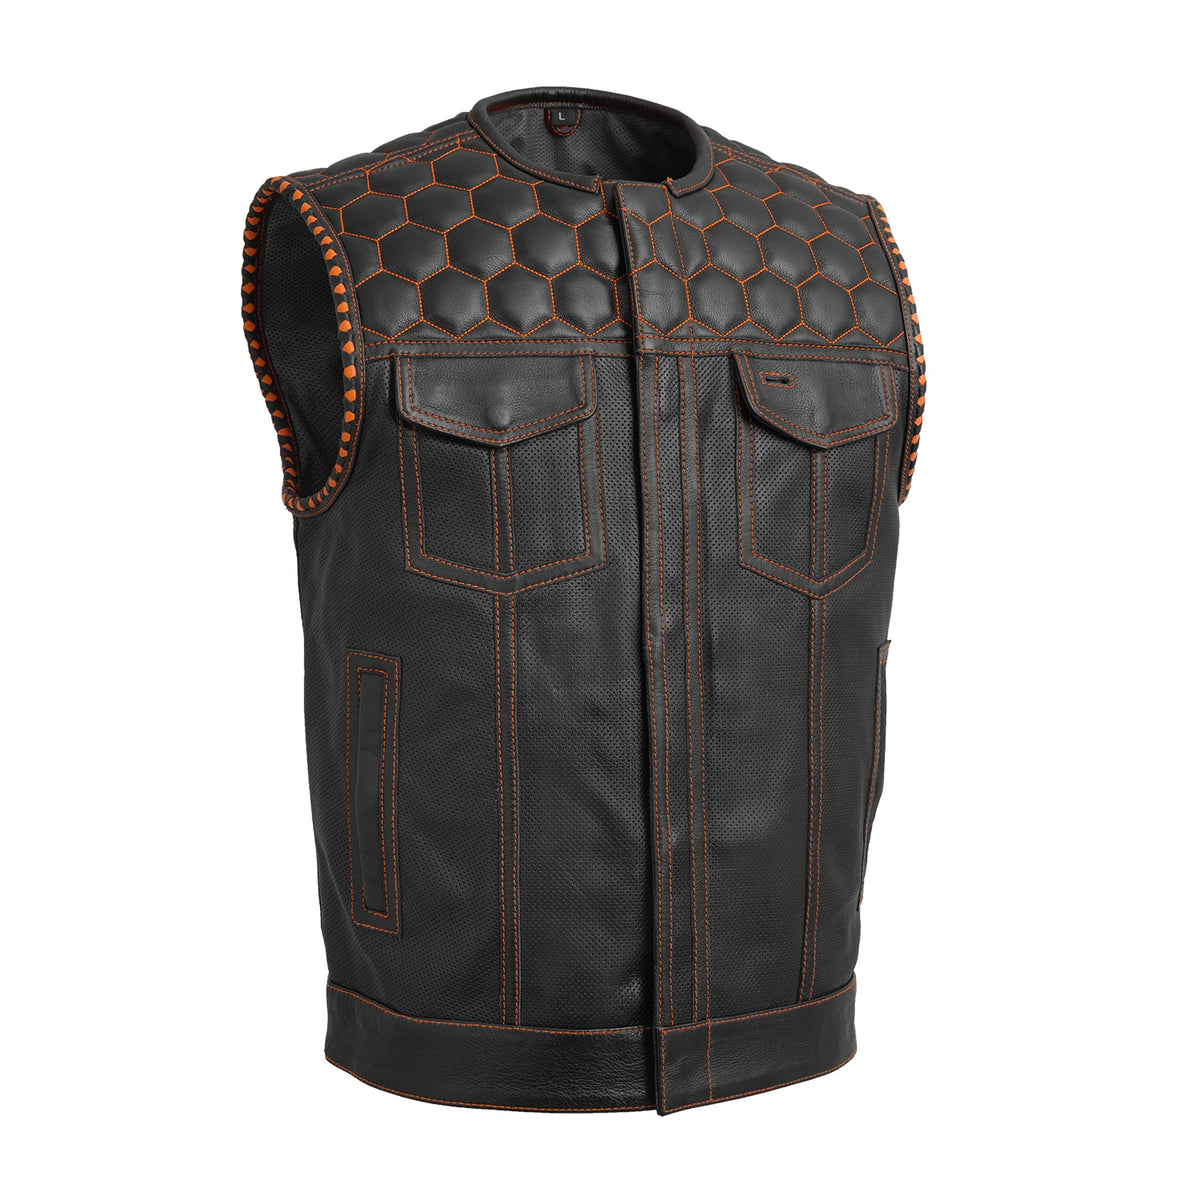 Hornet Perforated Men's Club Style Leather Vest Men's Leather Vest First Manufacturing Company Black Orange S 